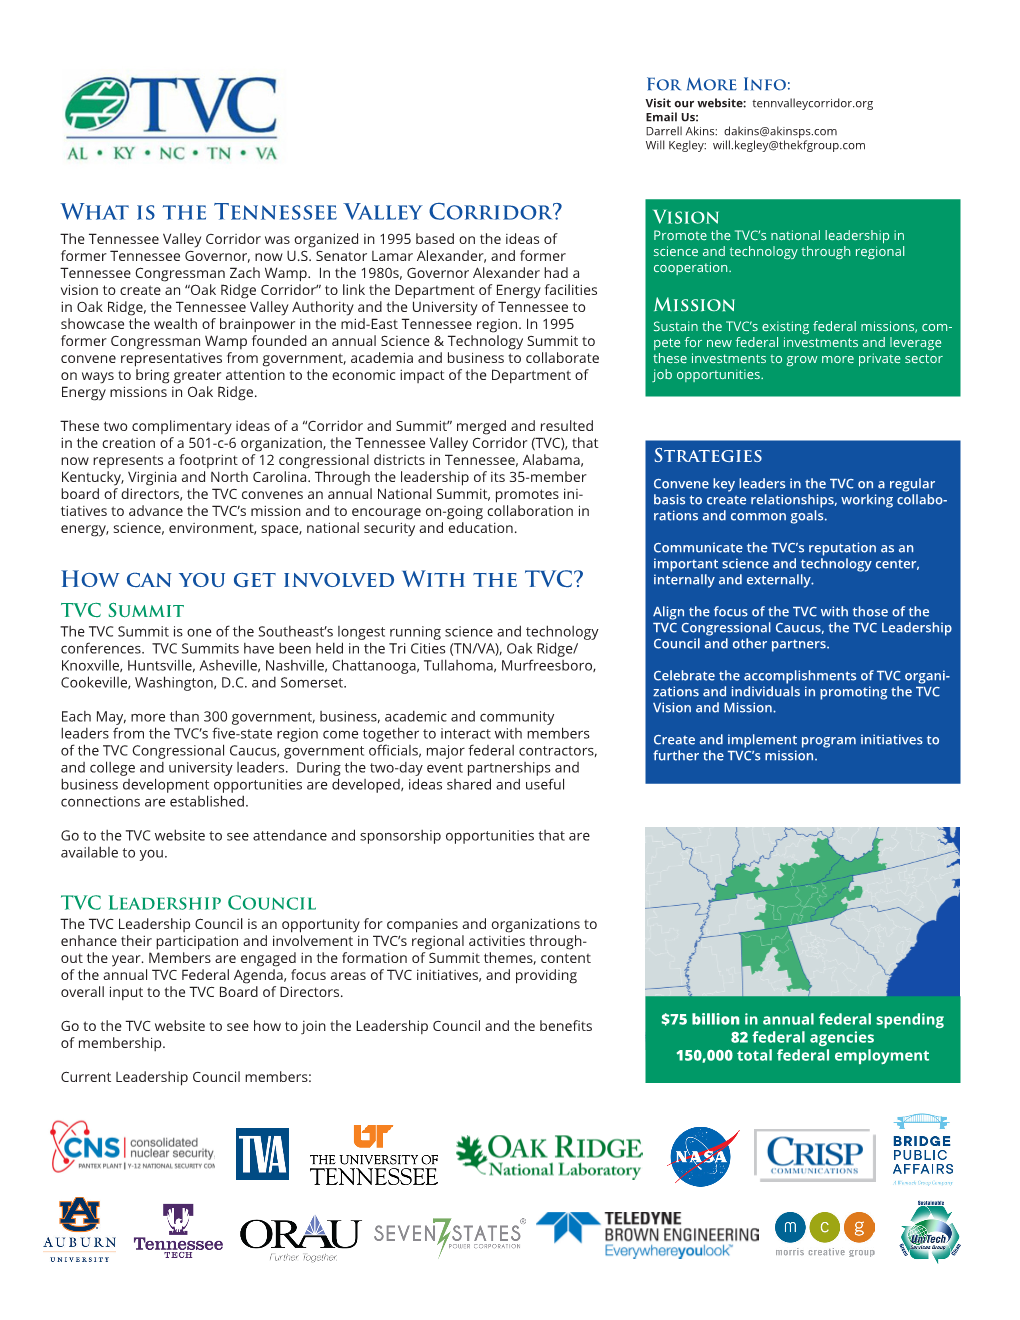 What Is the Tennessee Valley Corridor? How Can You Get Involved with the TVC?